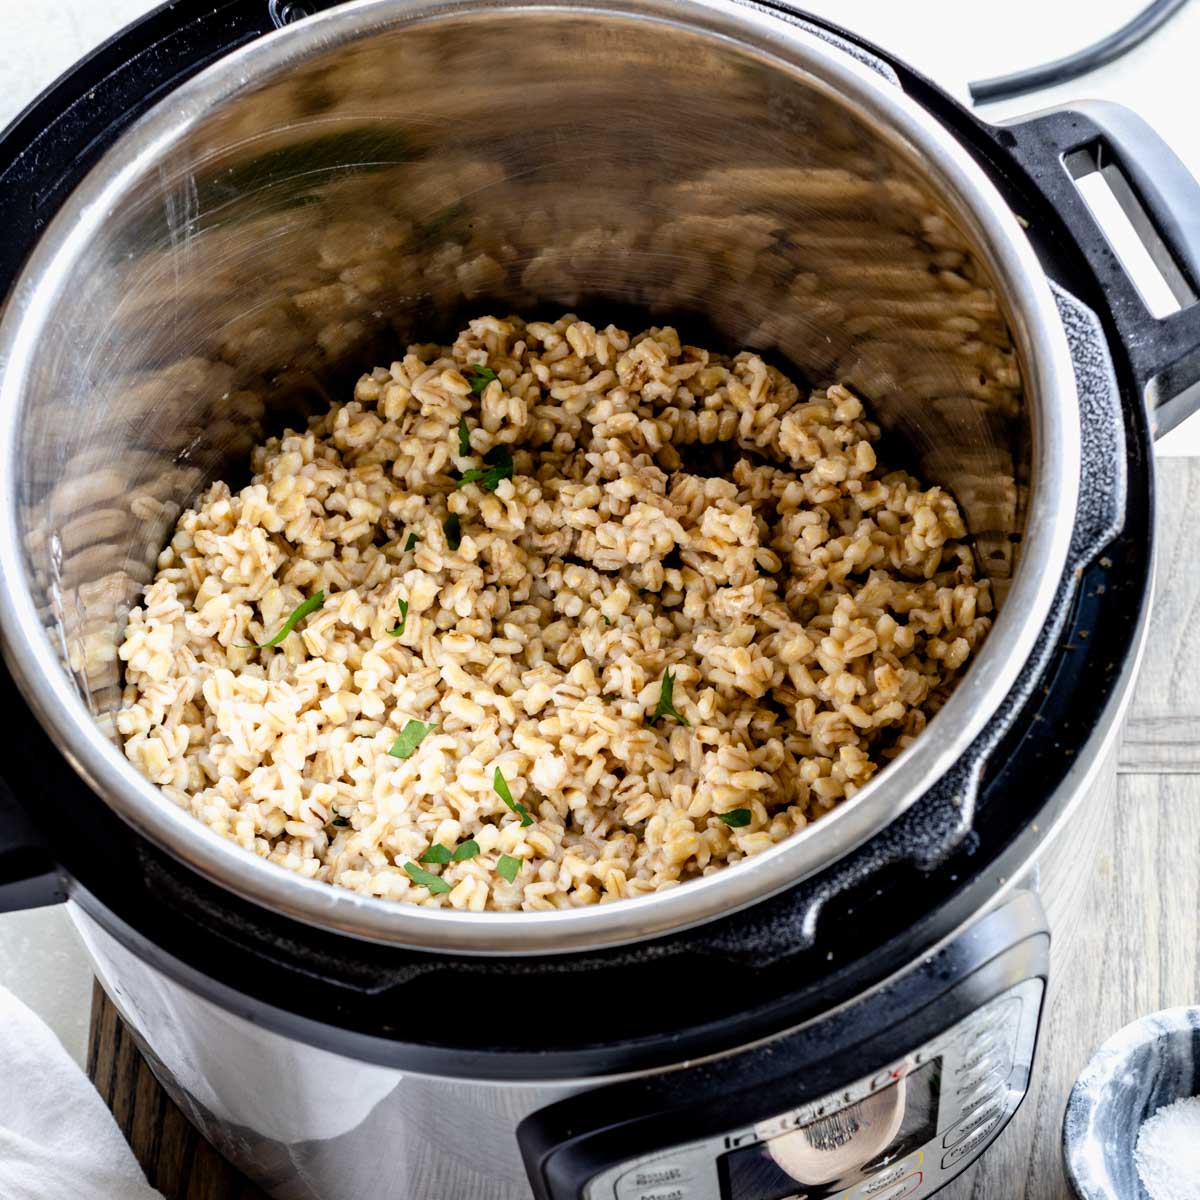 How Long To Cook Barley In Slow Cooker